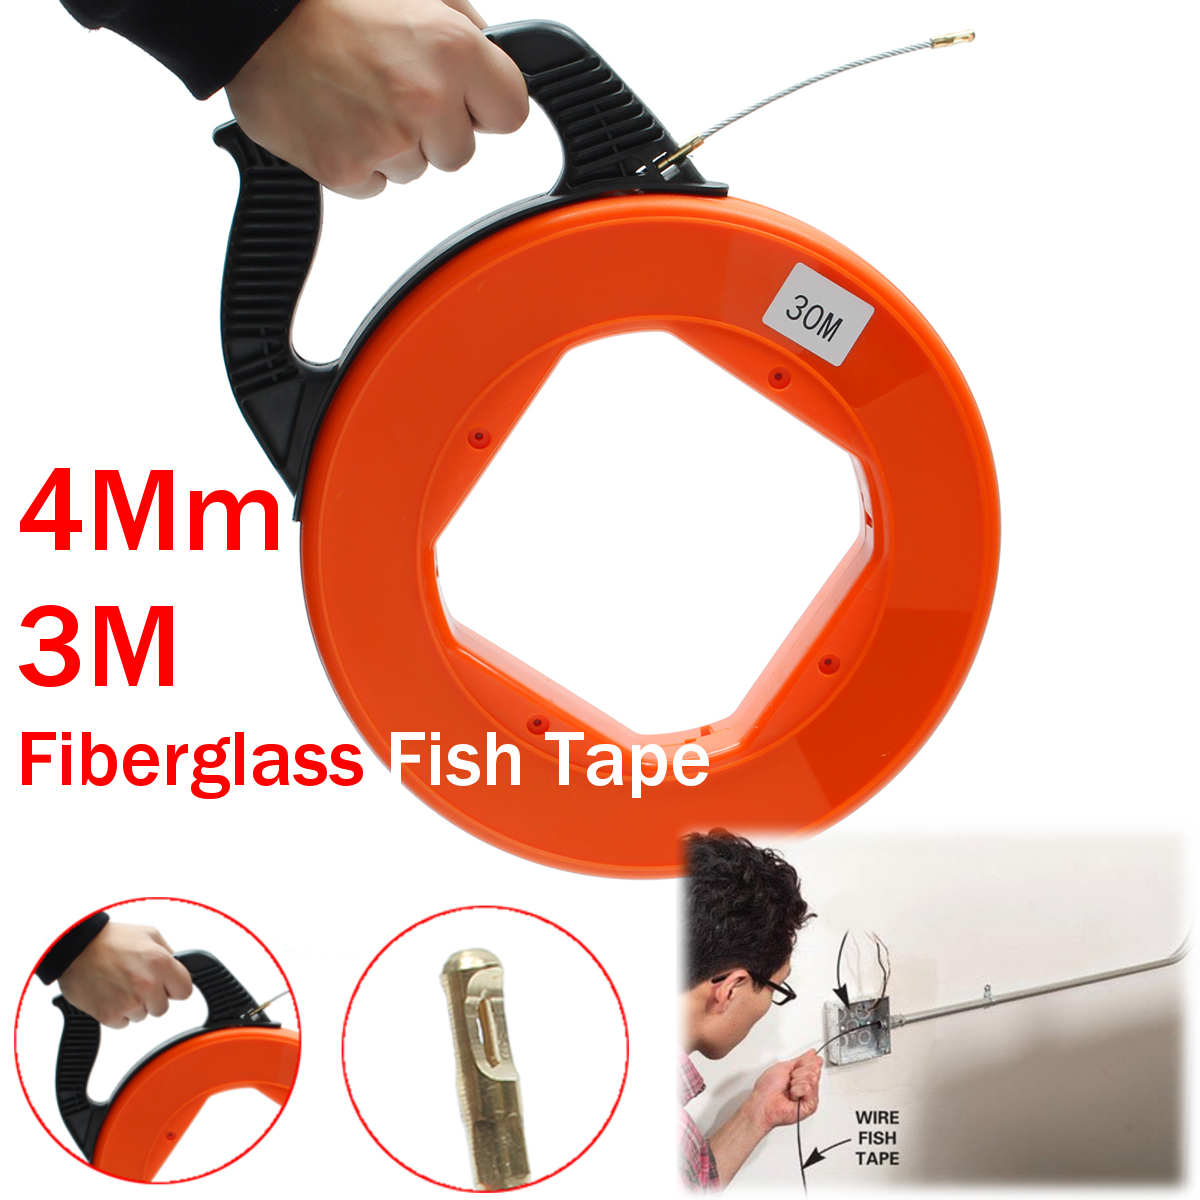 30M-Fiberglass-Fish-Tape-For-Pulling-Wire-and-Cable-1242224-1